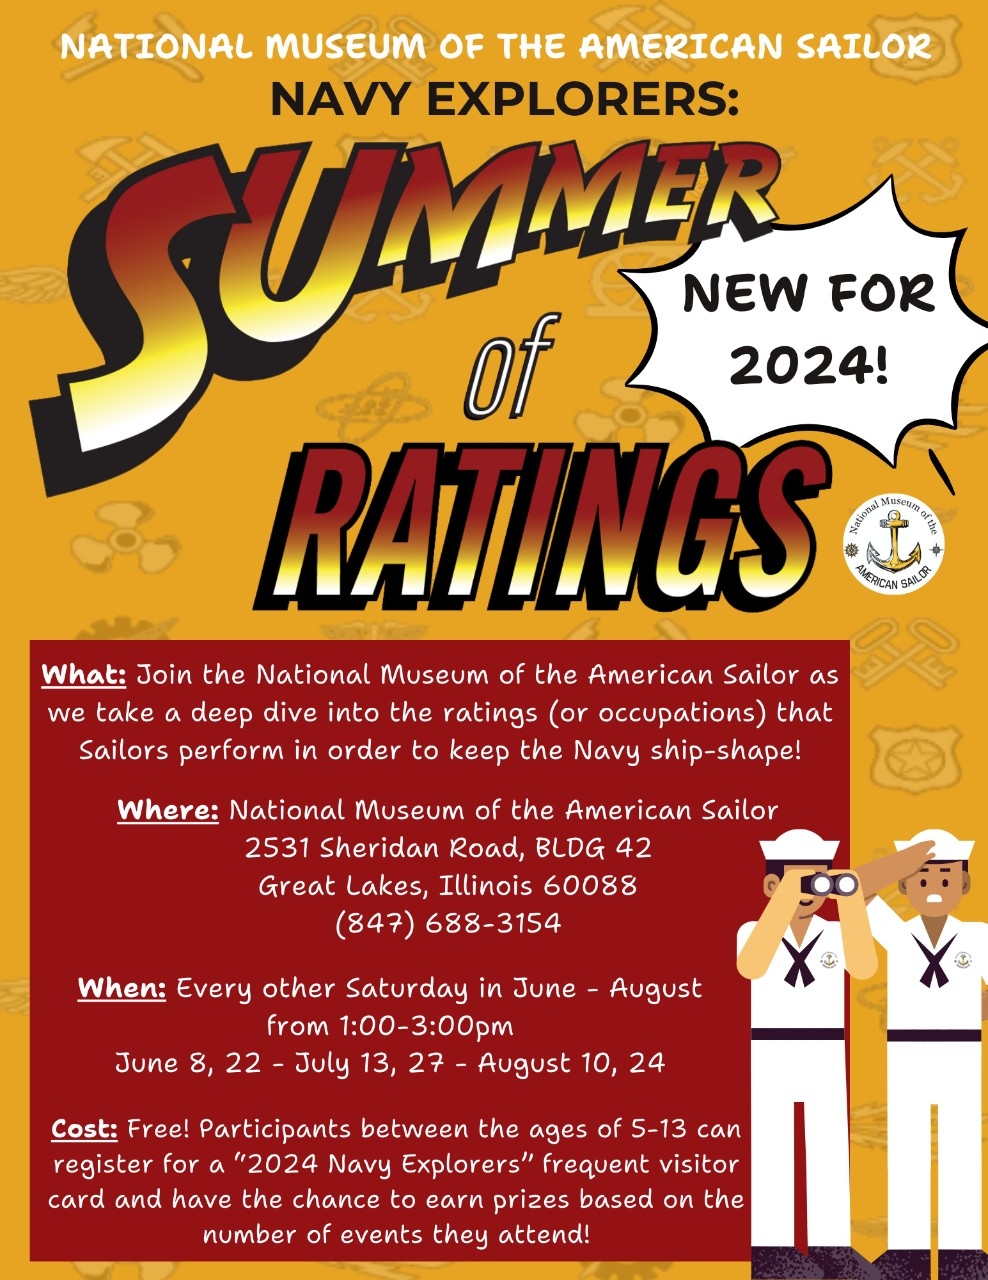 Calling all &quot;Navy Explorers&quot; join us for a Summer of Ratings!